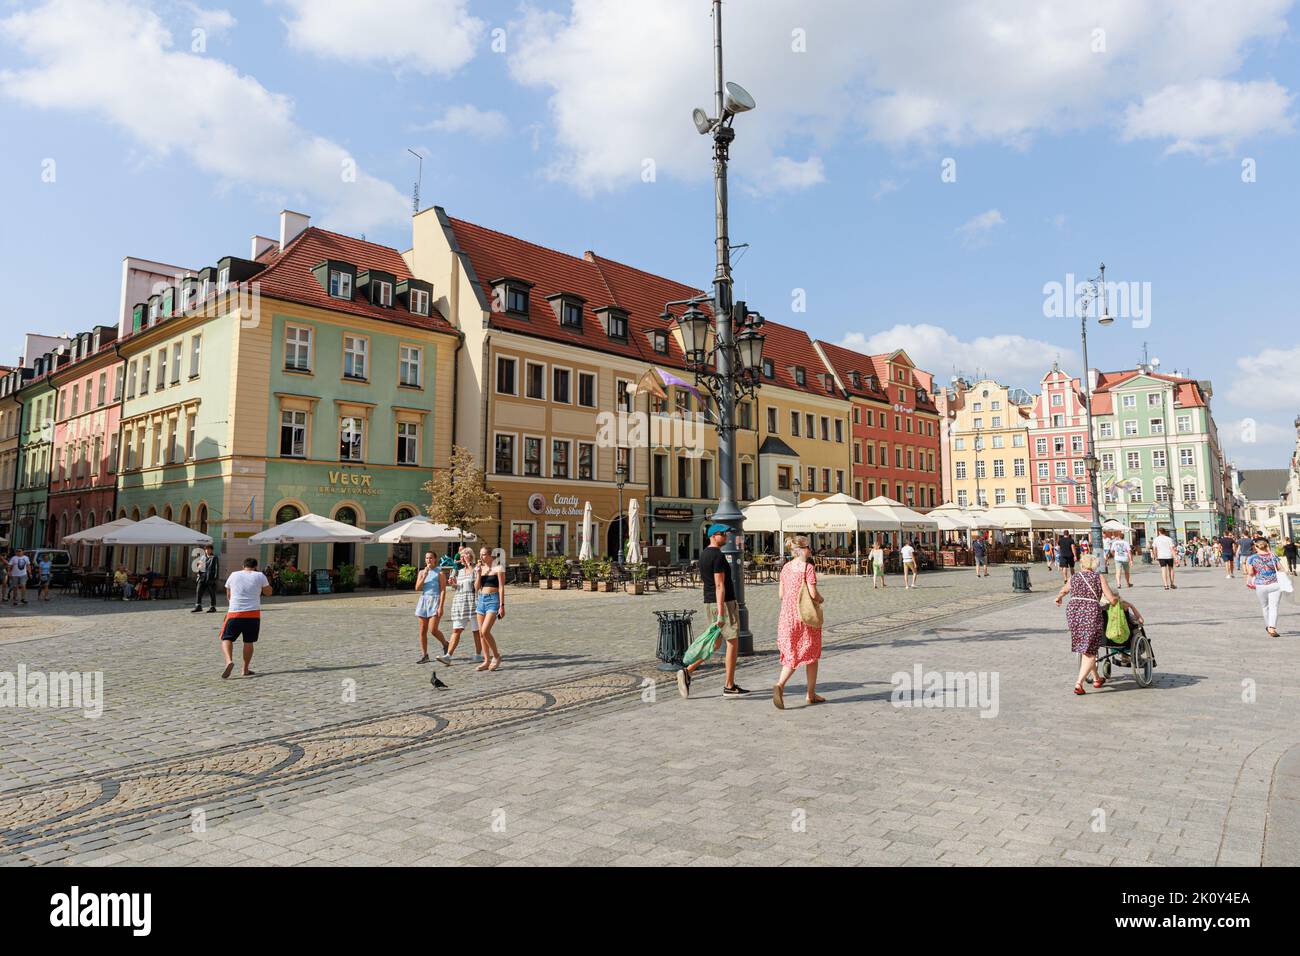 Street view of Old Town architecture, Central Market Square in Wroclaw, Poland. Stock Photo